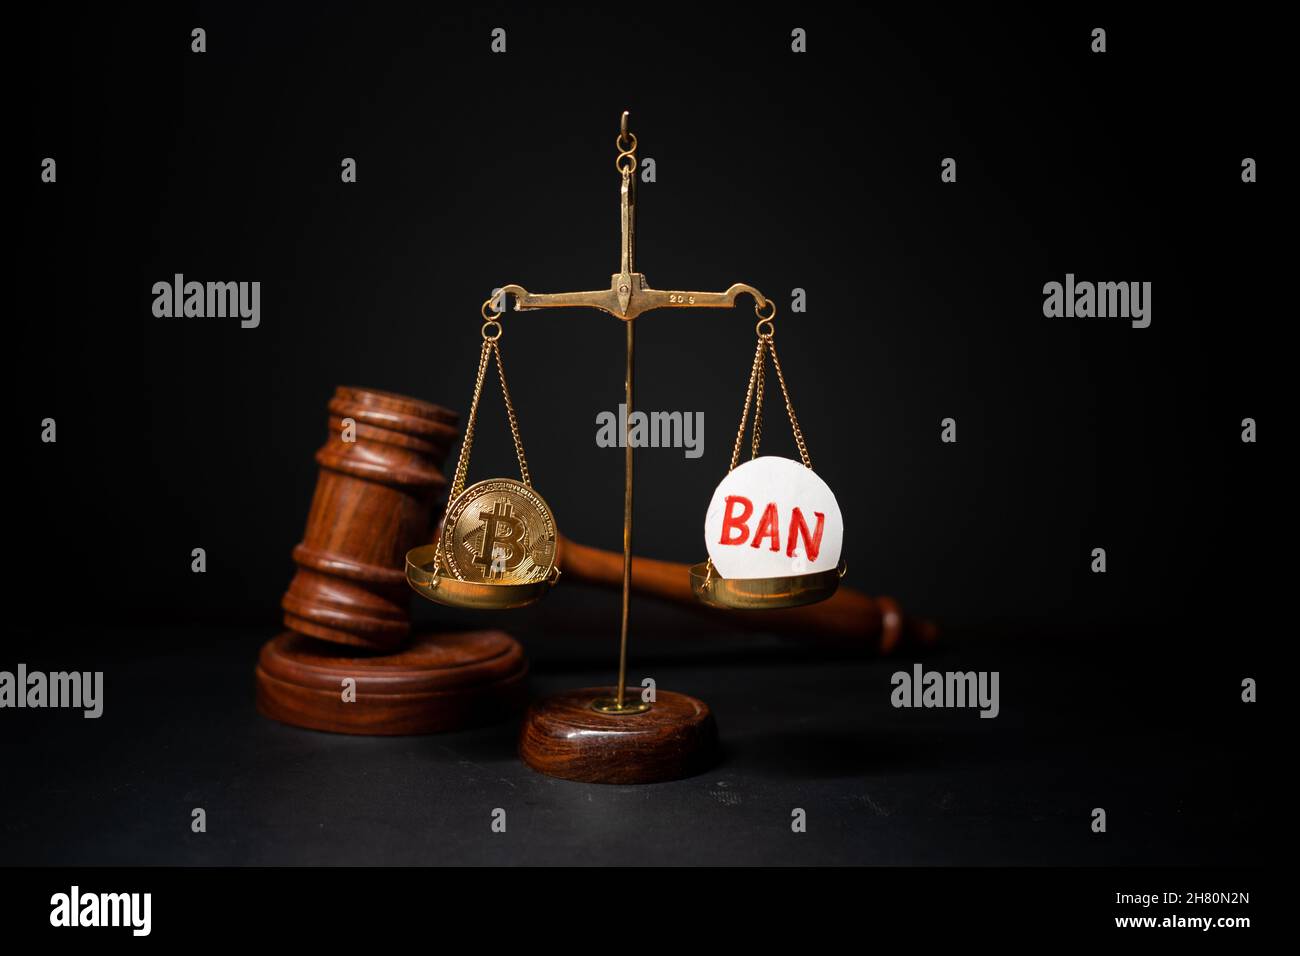 Maski, India - 26 November, 2021 : concpet of cryptocurrency ban showing with Bit coin and ban sybmol on balance scale with judge hammer on background Stock Photo